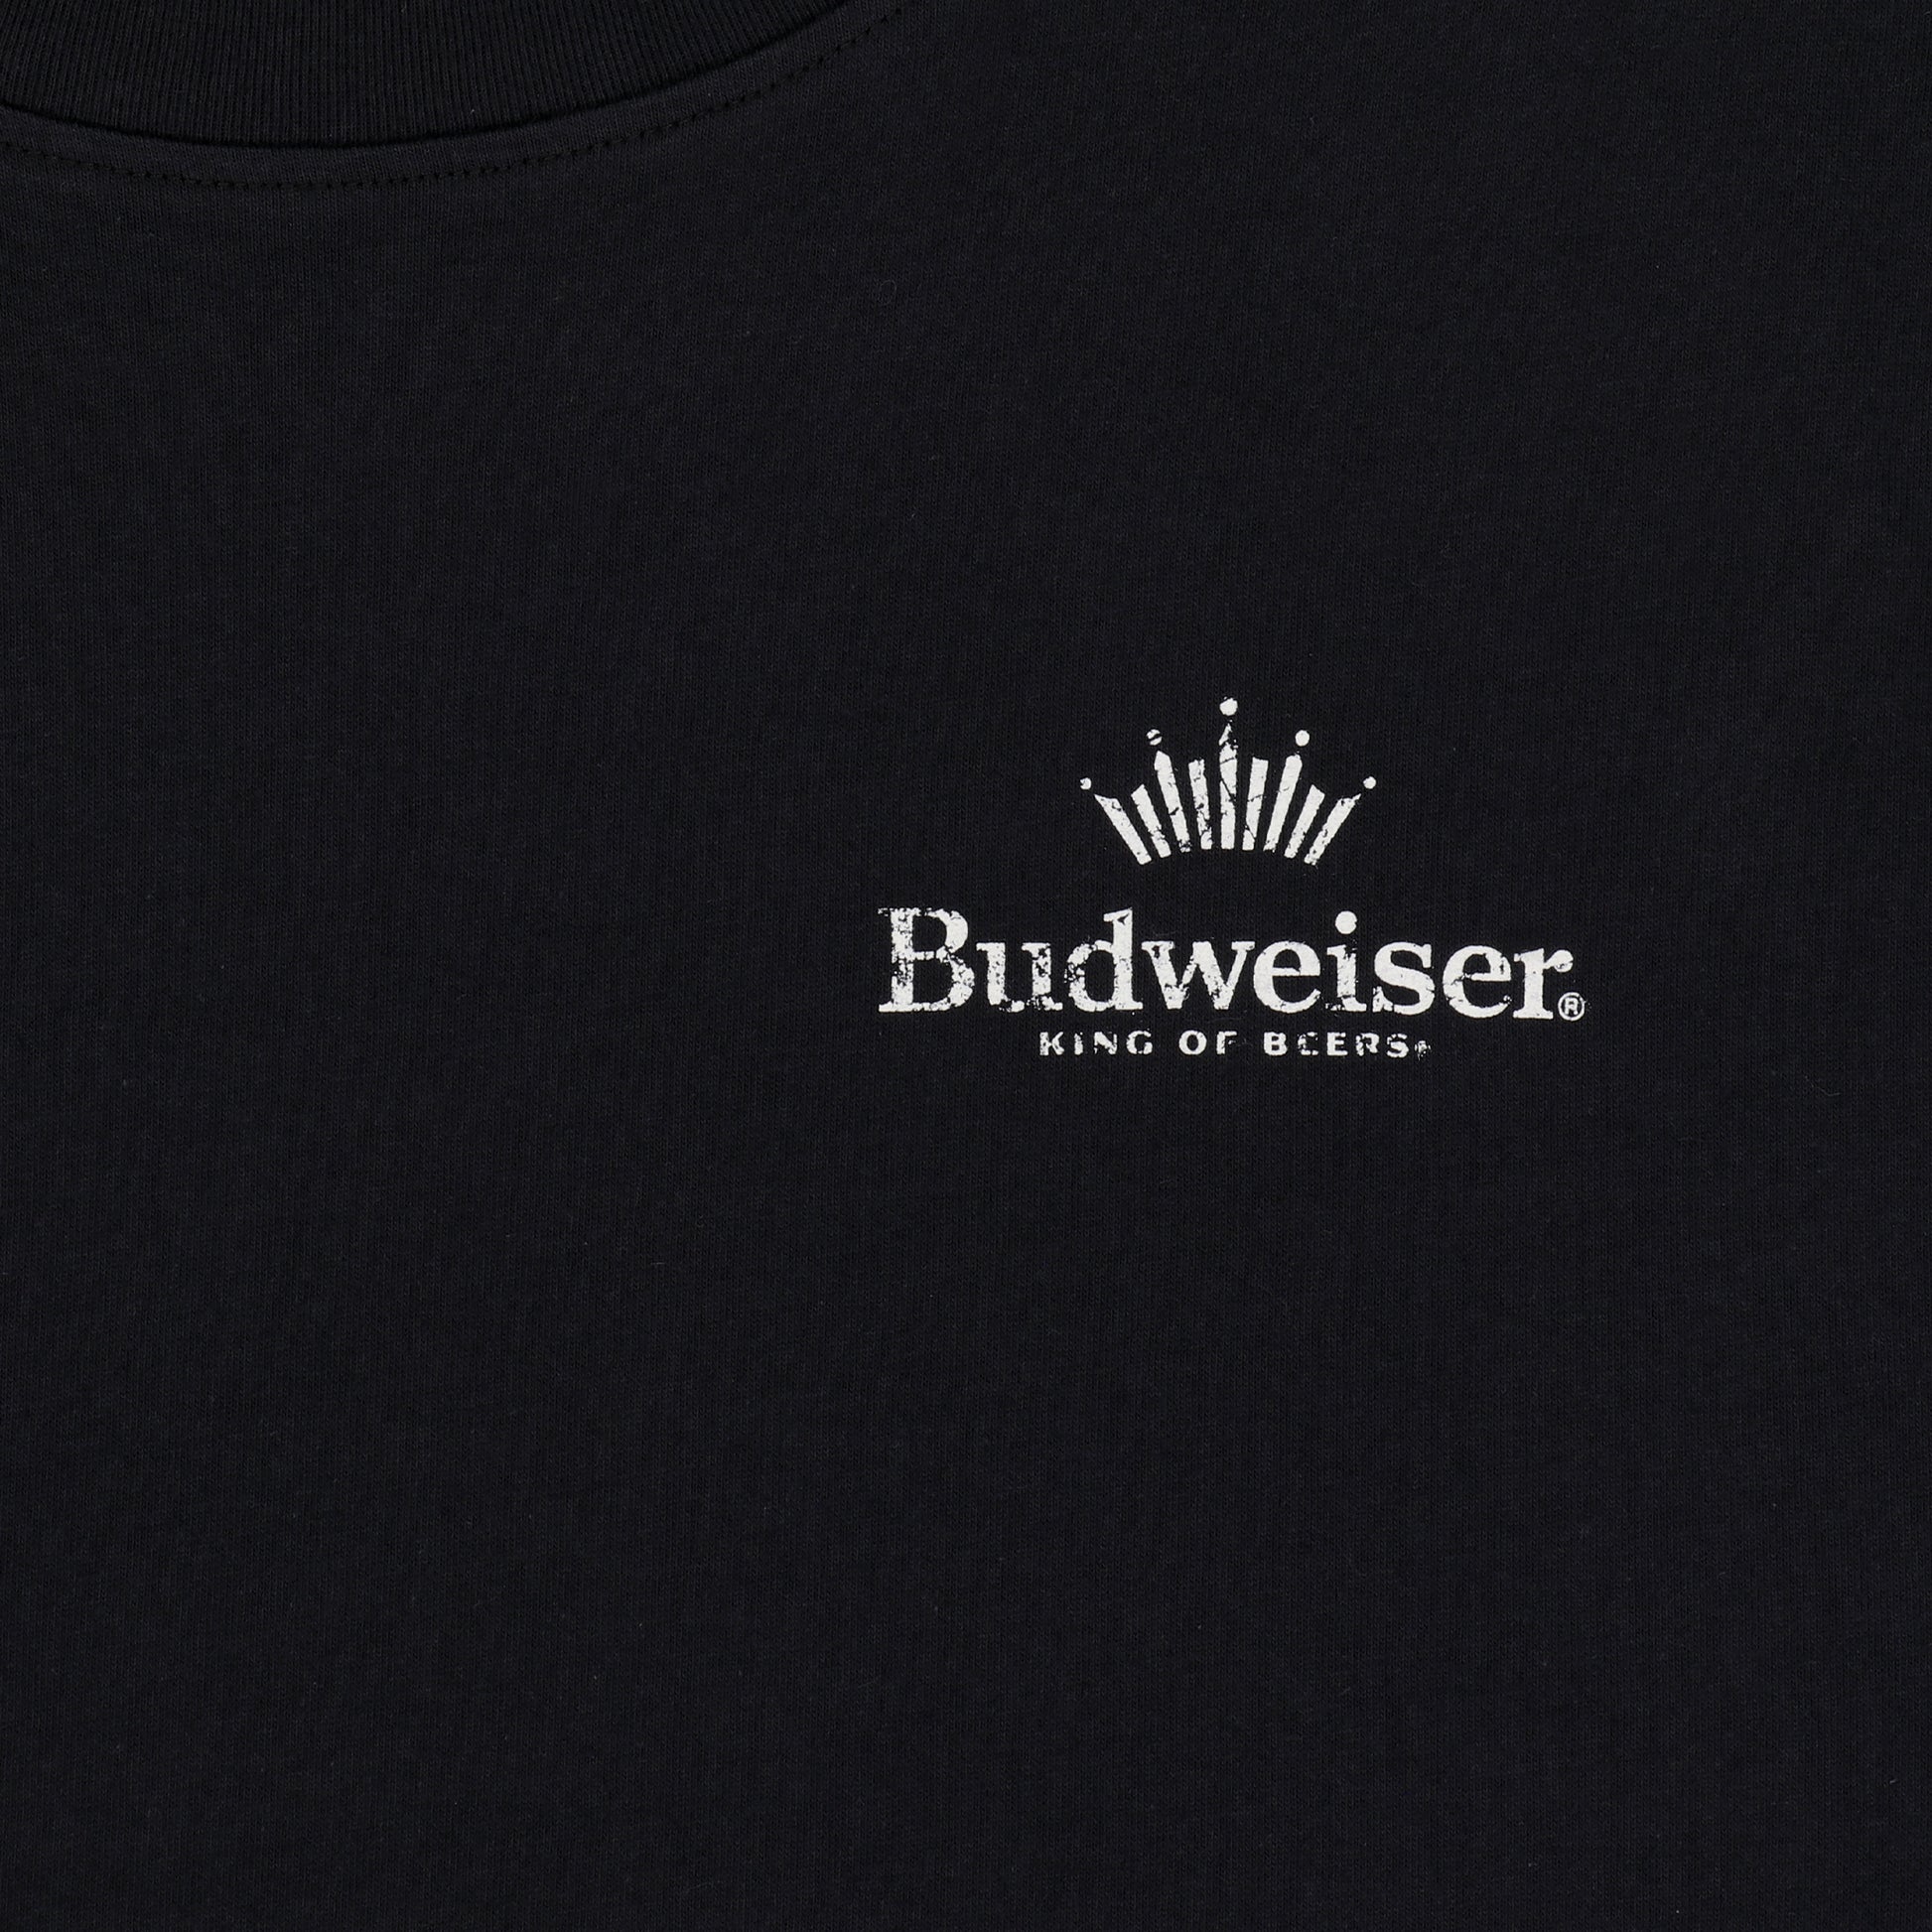  Close Up Front View of Budweiser x PacSun "King of Beers" Black Shirt